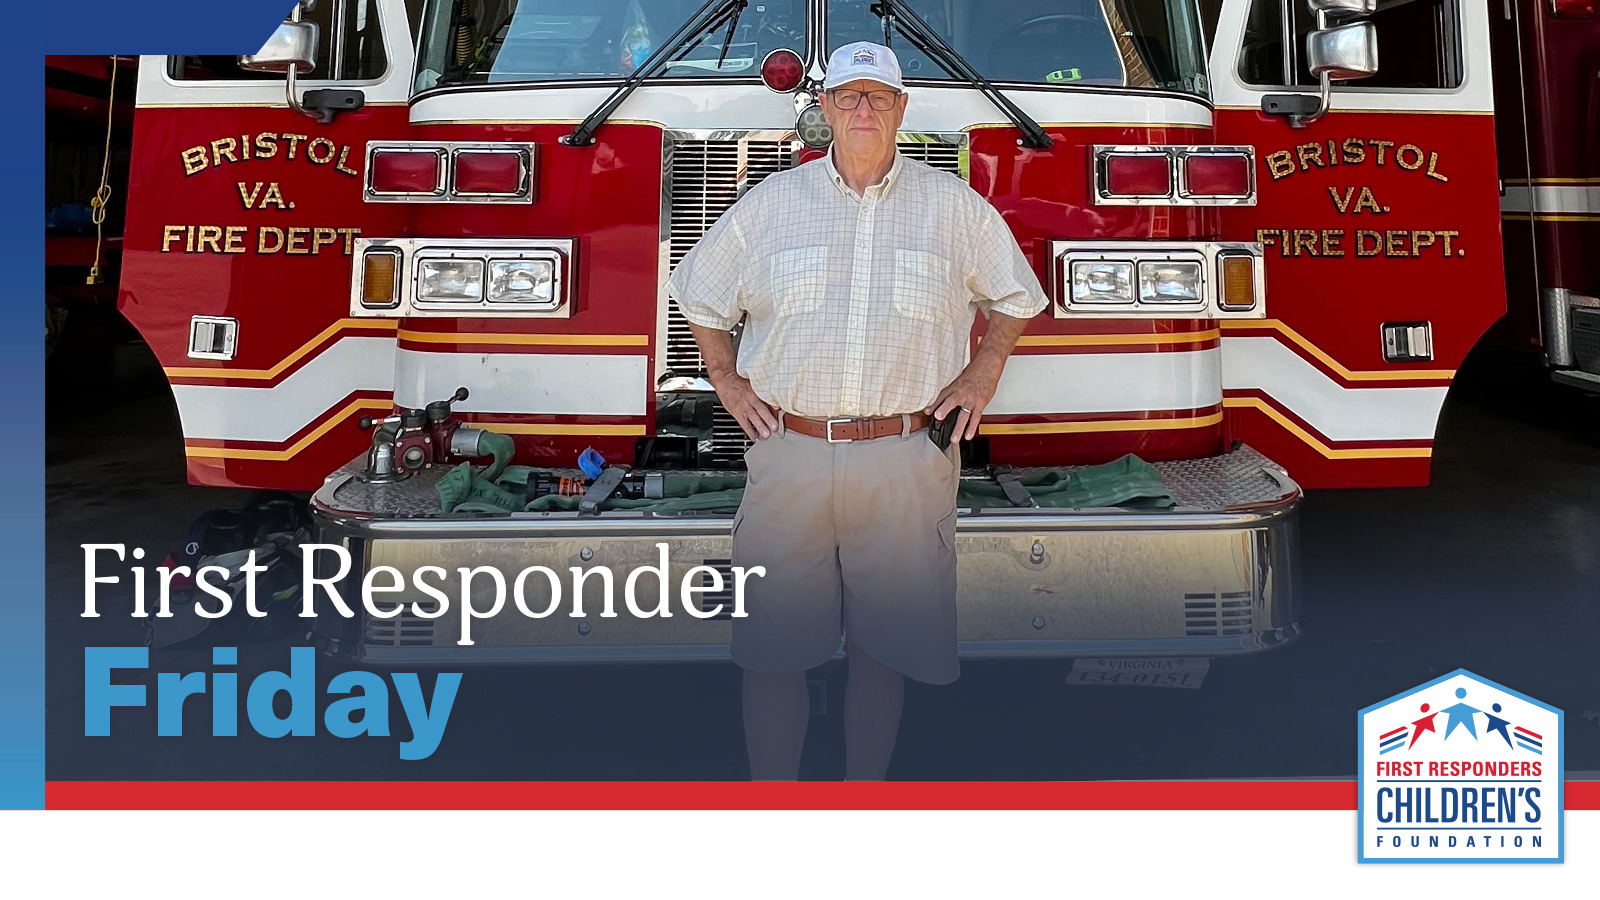 Retired Firefighter Clayton Thompson Spreads the Word about FRCF